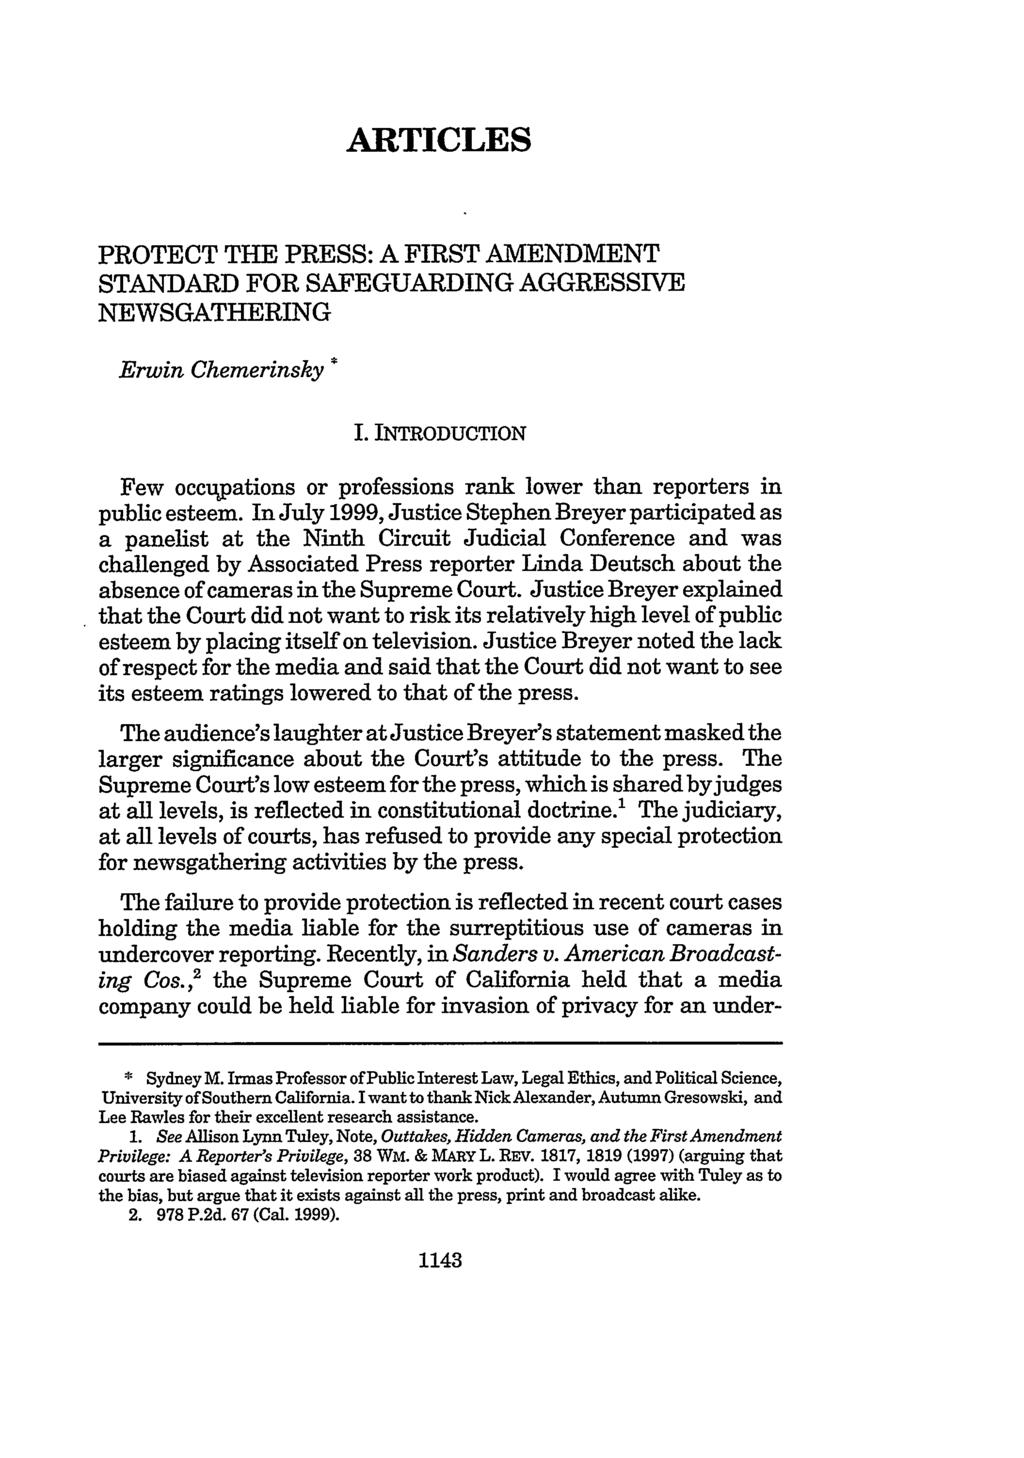 ARTICLES PROTECT THE PRESS: A FIRST AMENDMENT STANDARD FOR SAFEGUARDING AGGRESSIVE NEWSGATHERING Erwin Chemerinsky * I. INTRODUCTION Few occu.